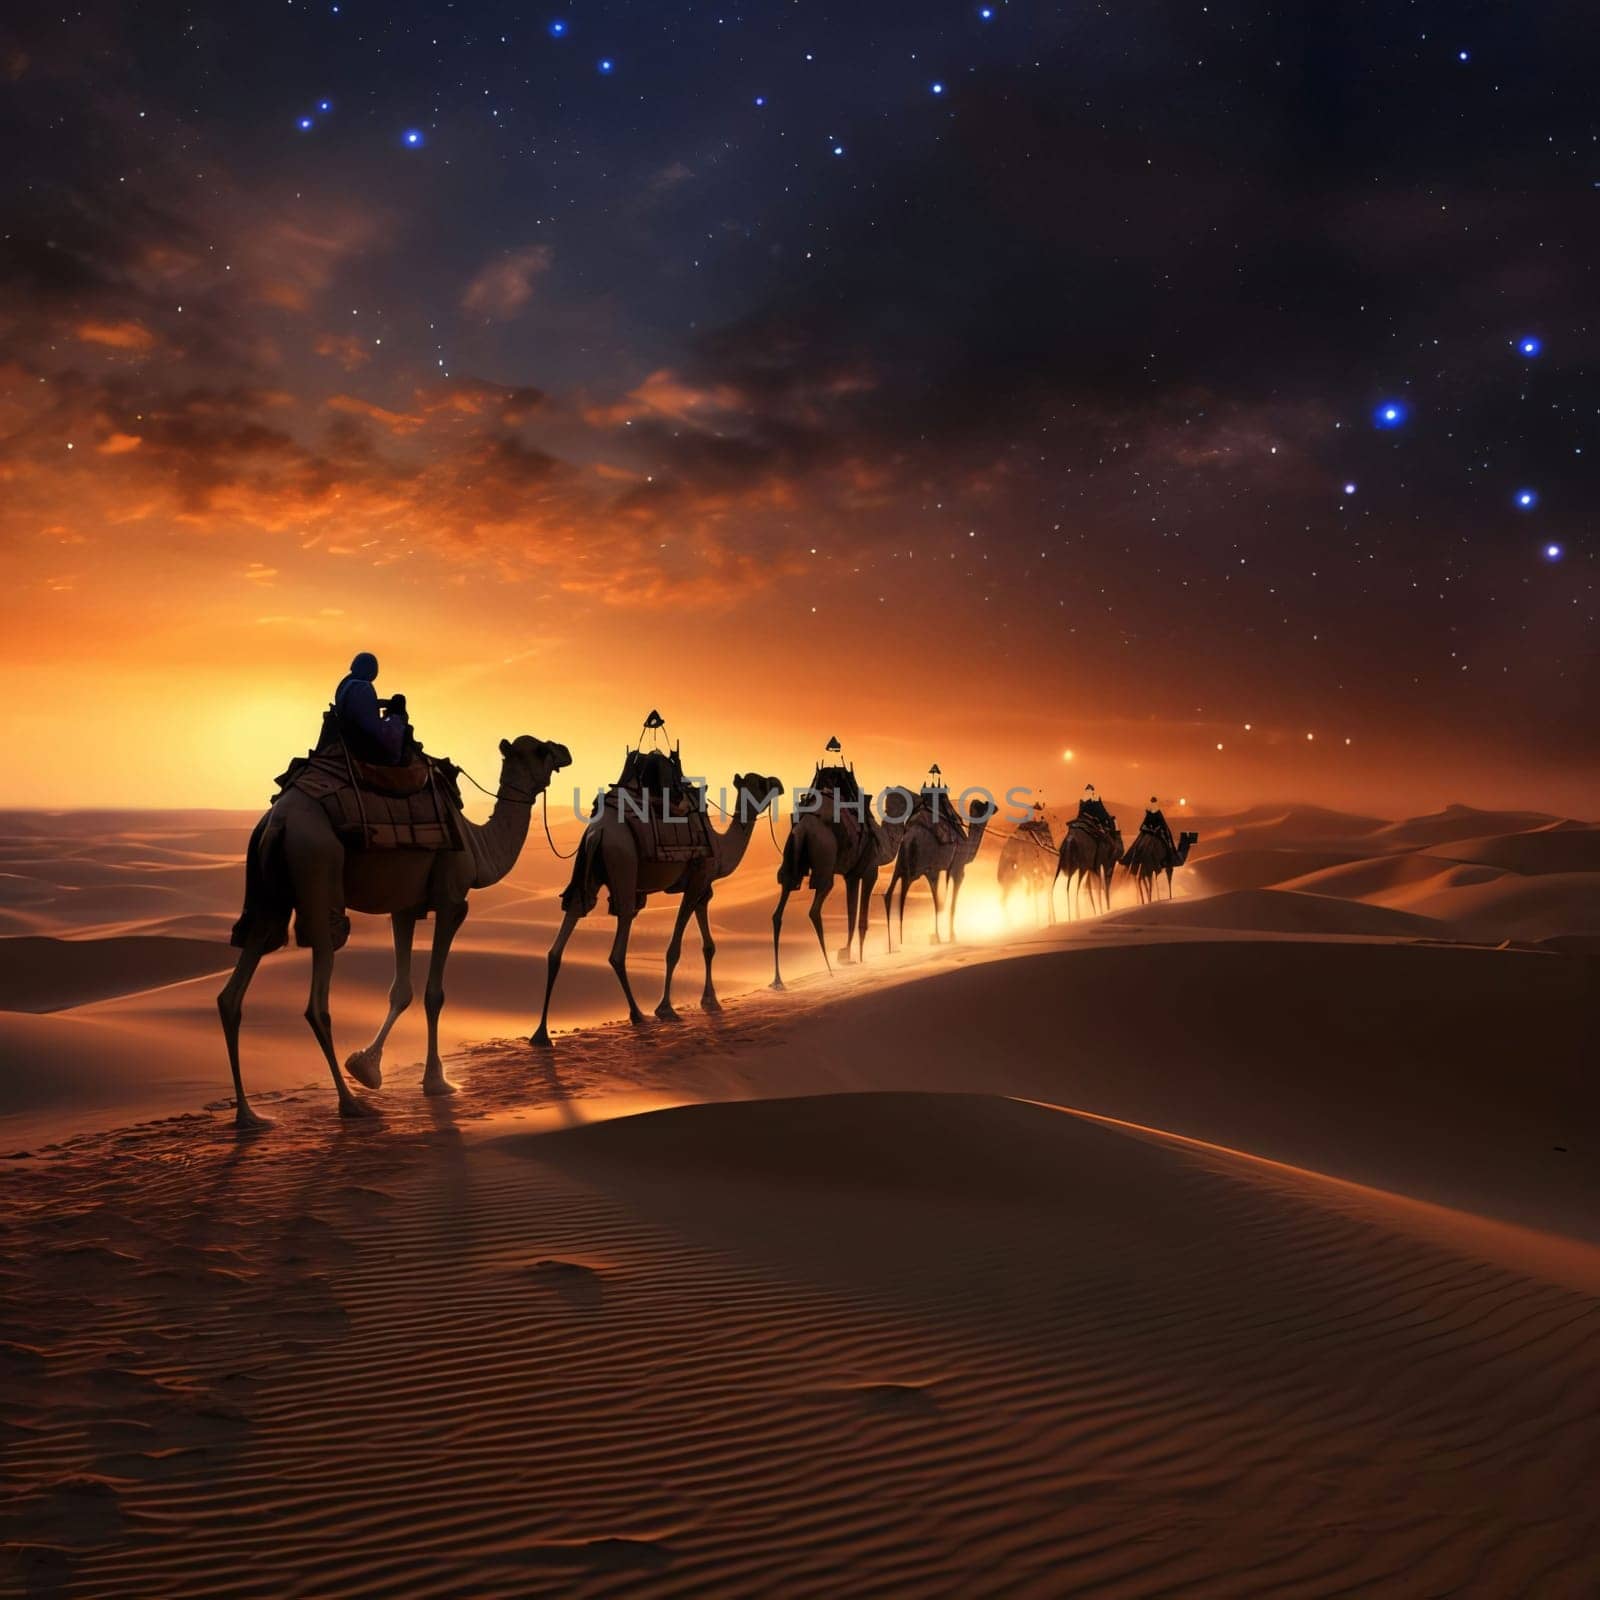 A man leading a herd of camels through the desert at sunset stars in the sky. Ramadan as a time of fasting and prayer for Muslims. A time to meet with Allah.